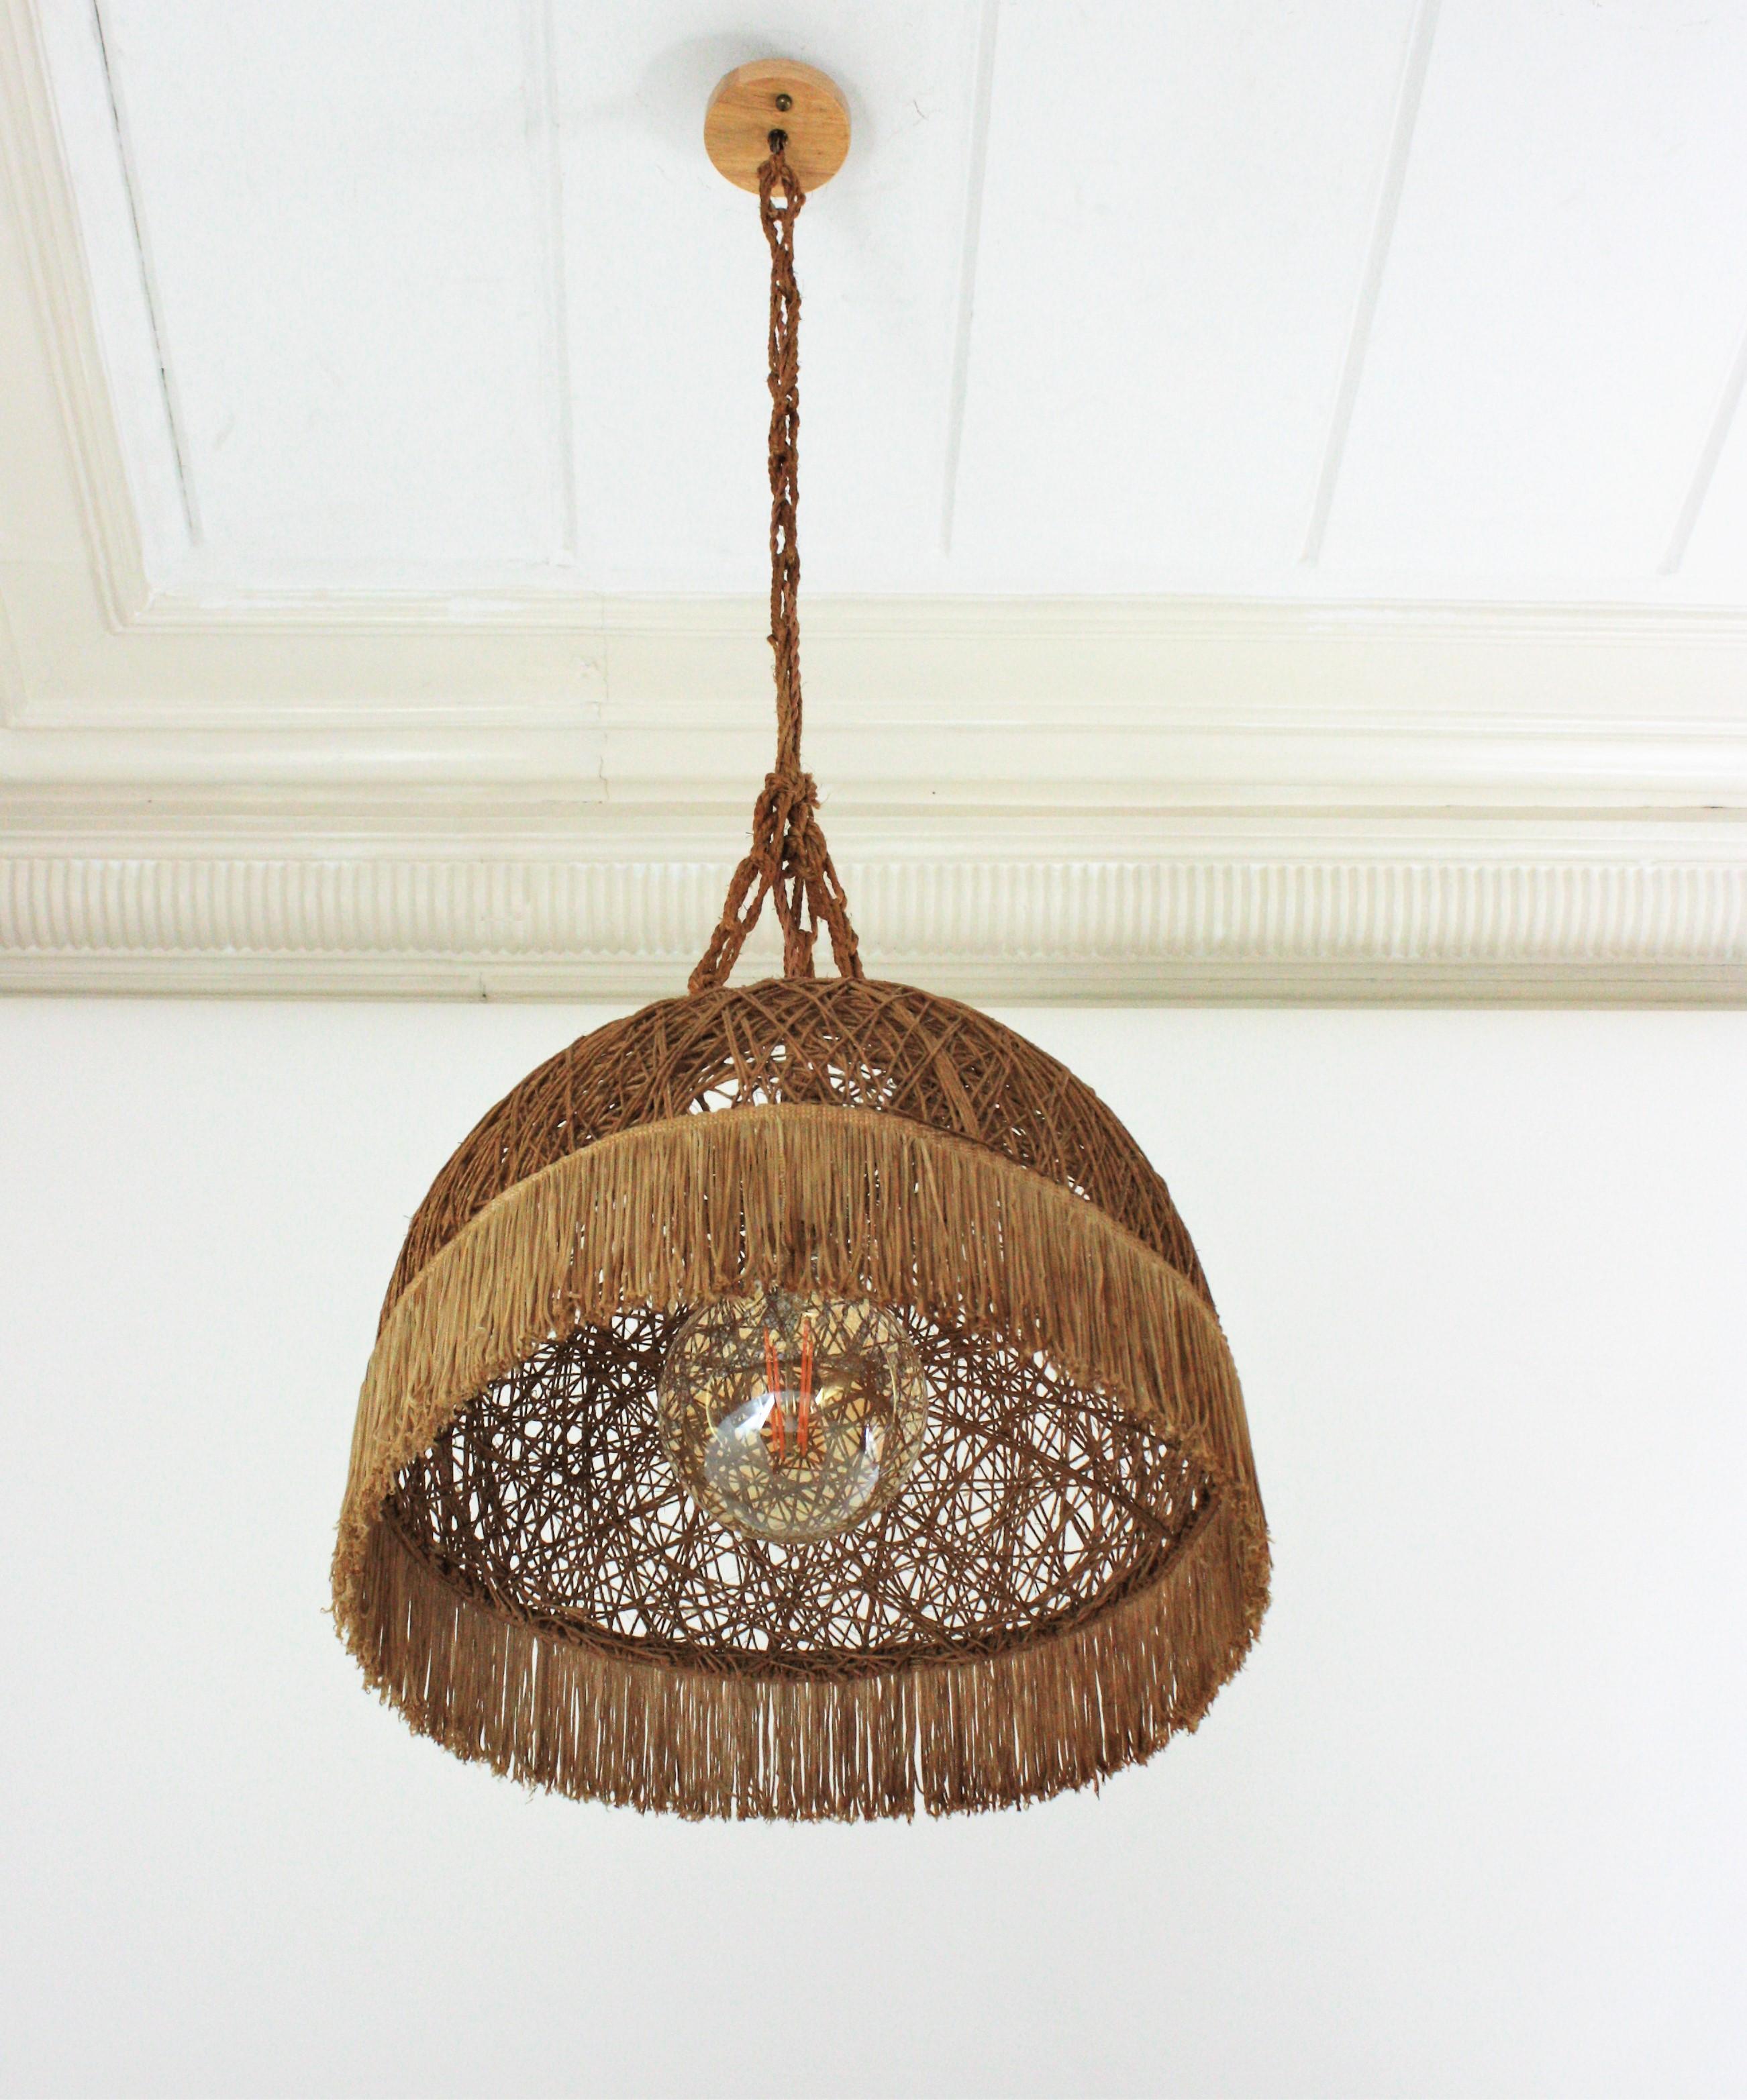 20th Century Spanish Rope Hand Woven Pendant Lamp / Suspension with Fringe For Sale